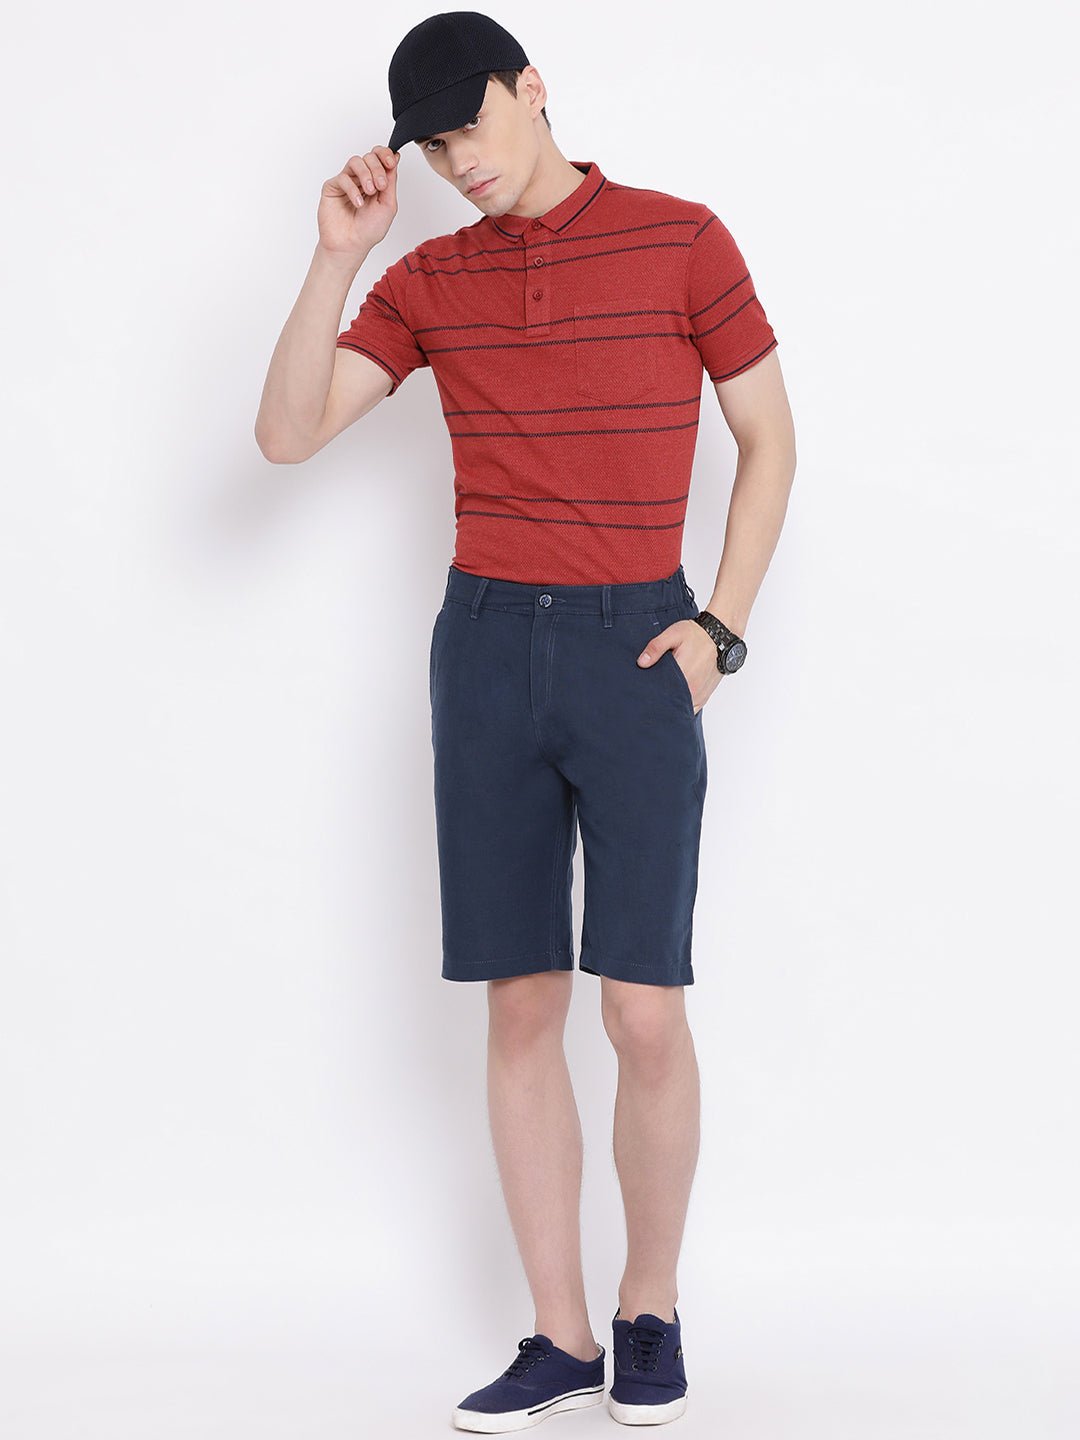 Red Striped Polo Neck T-Shirt - Men T-Shirts